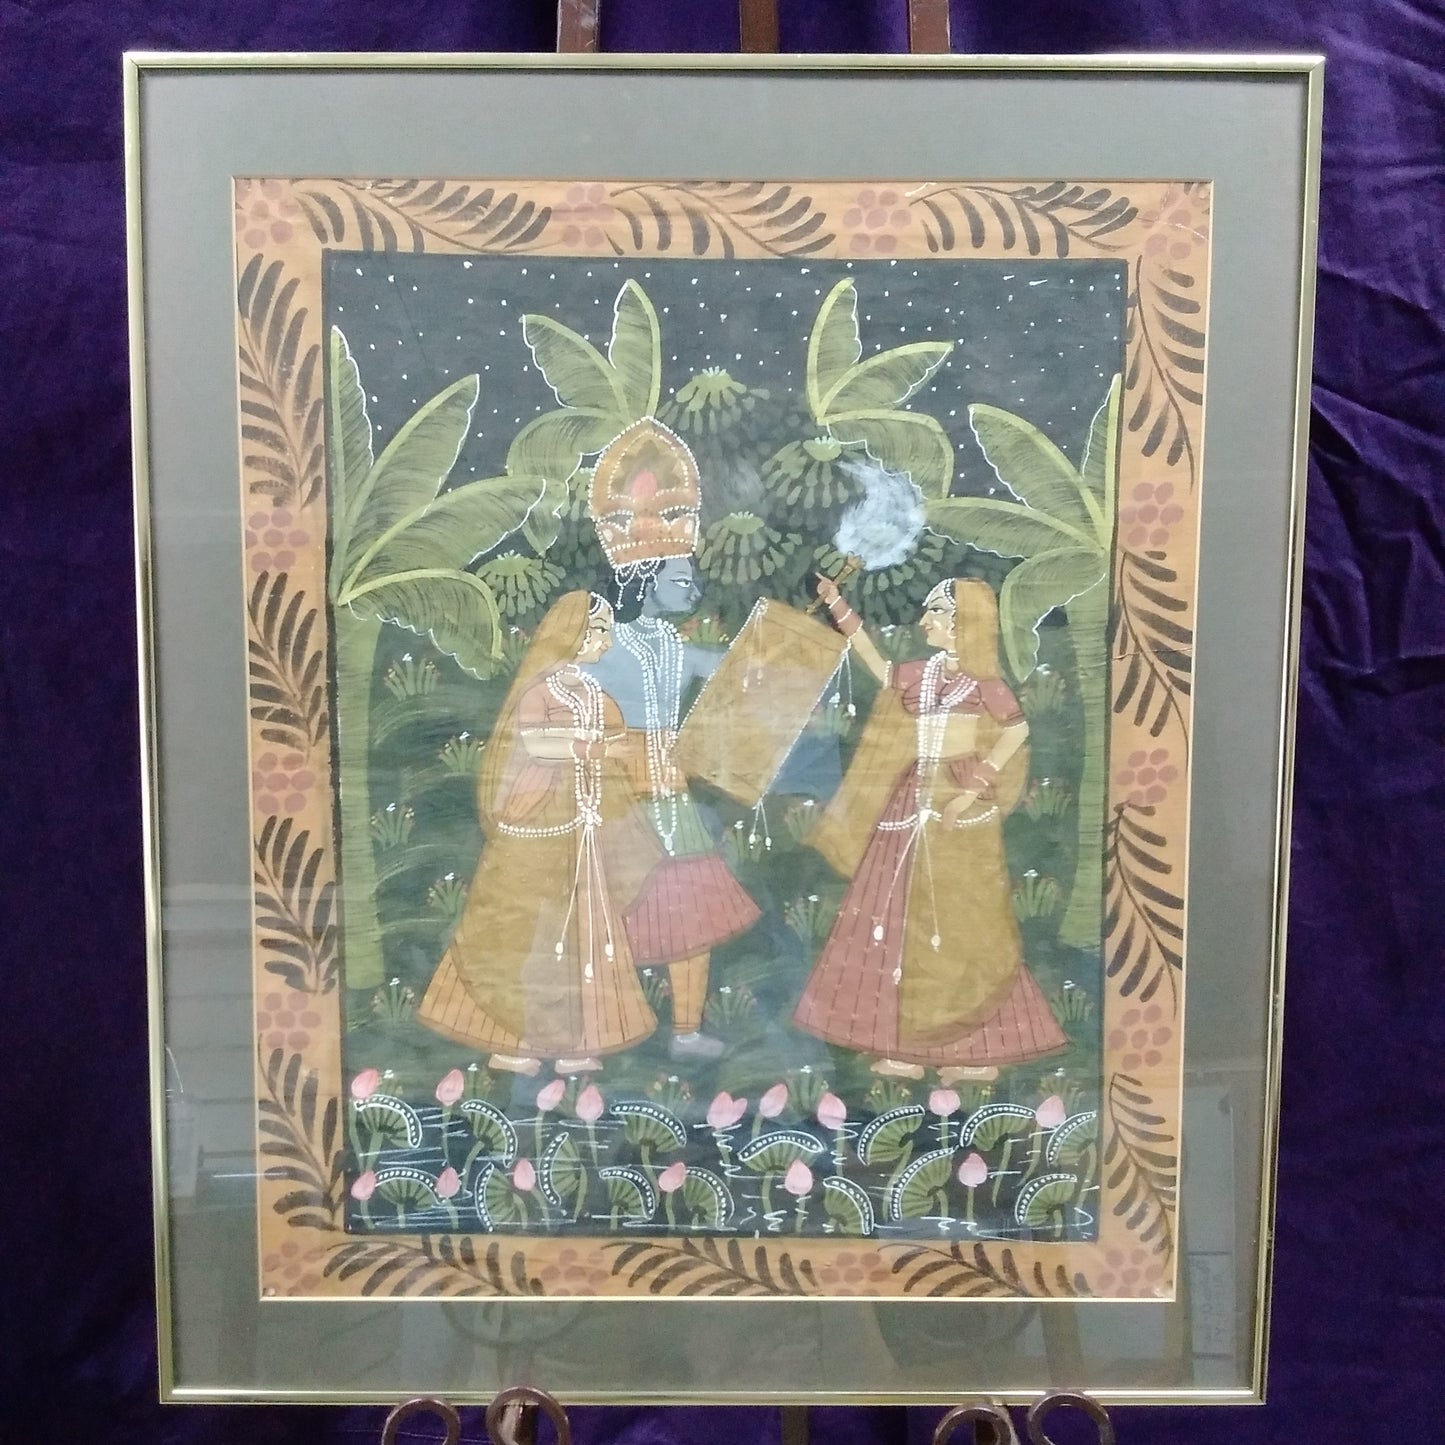 Vintage - Indian Silk Pichhwai Painting - Matted & Framed (W) 22.25" x (H) 26.25"